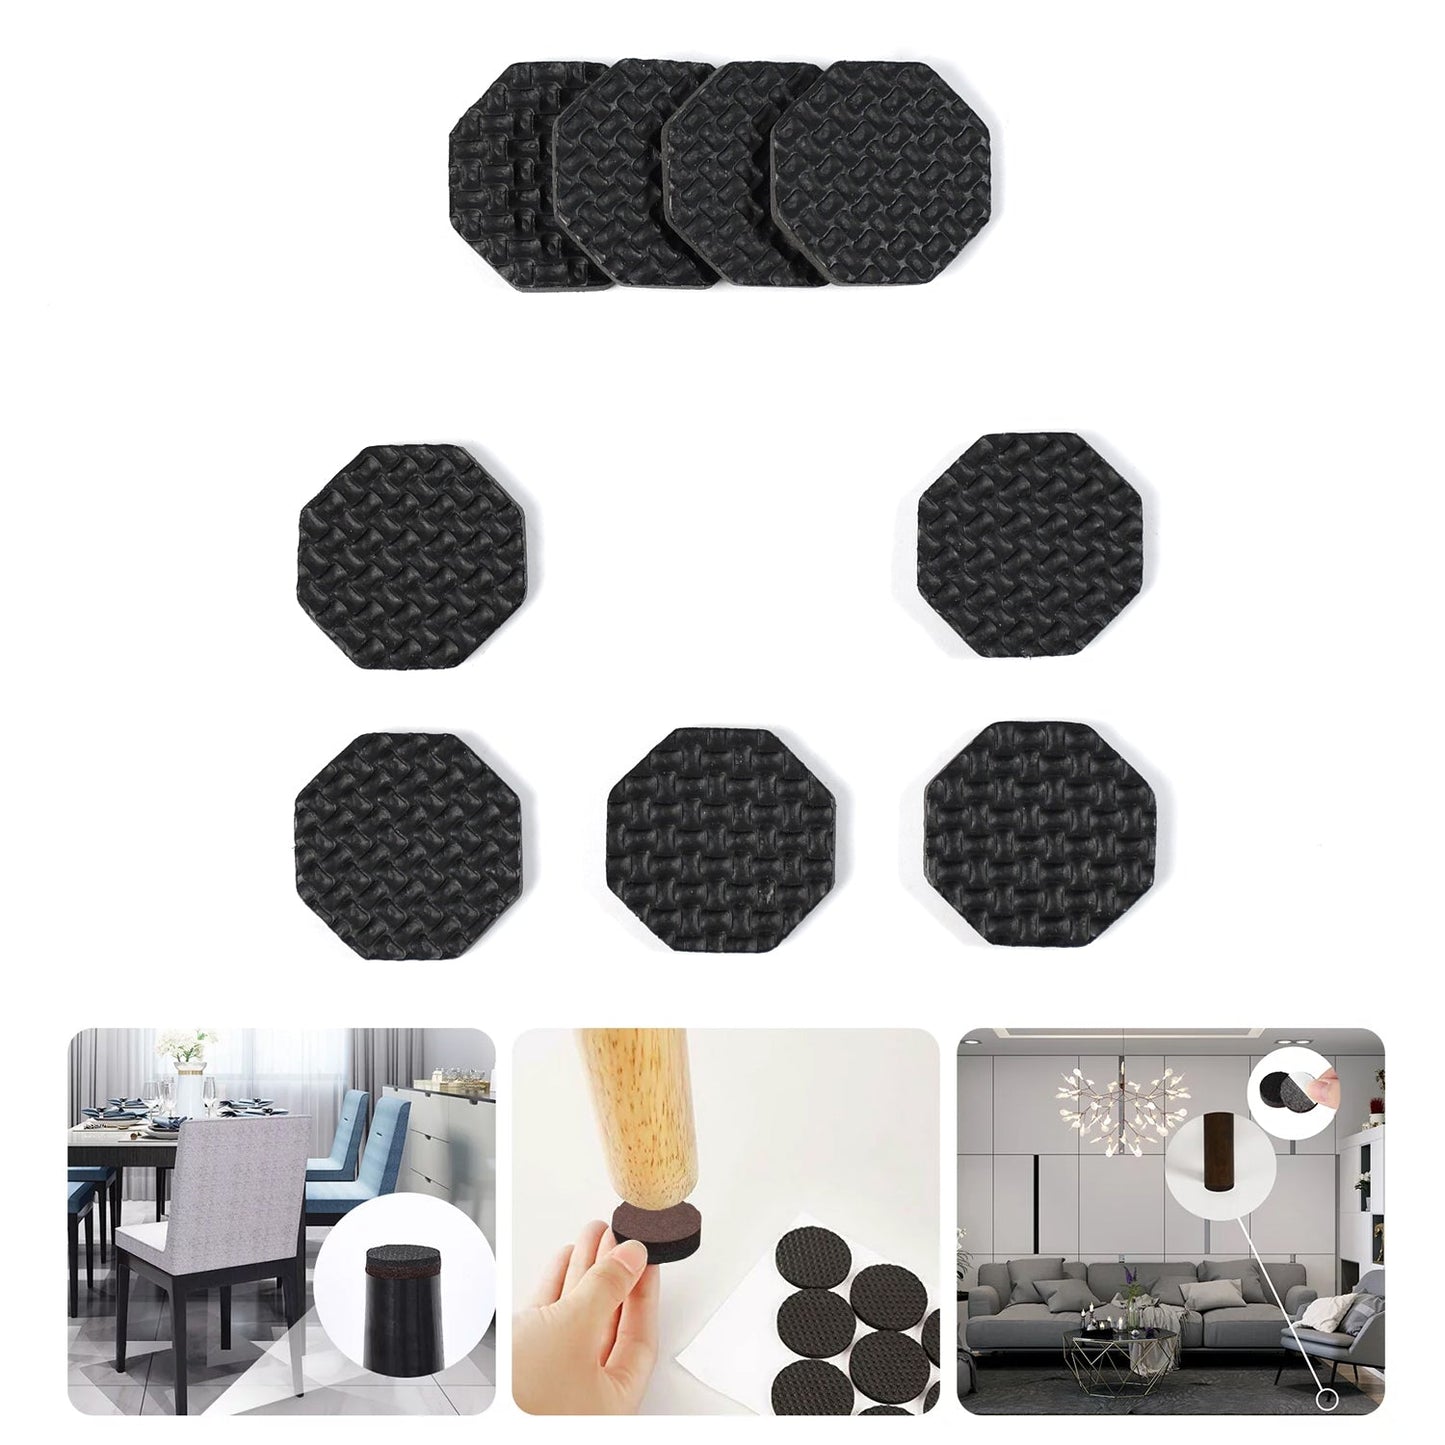 Self Adhesive Square Felt Pads Non Skid Floor Protector Furniture Sofa Furniture Chair Balance Pad Noise Insulation Pad (Pack of 9).